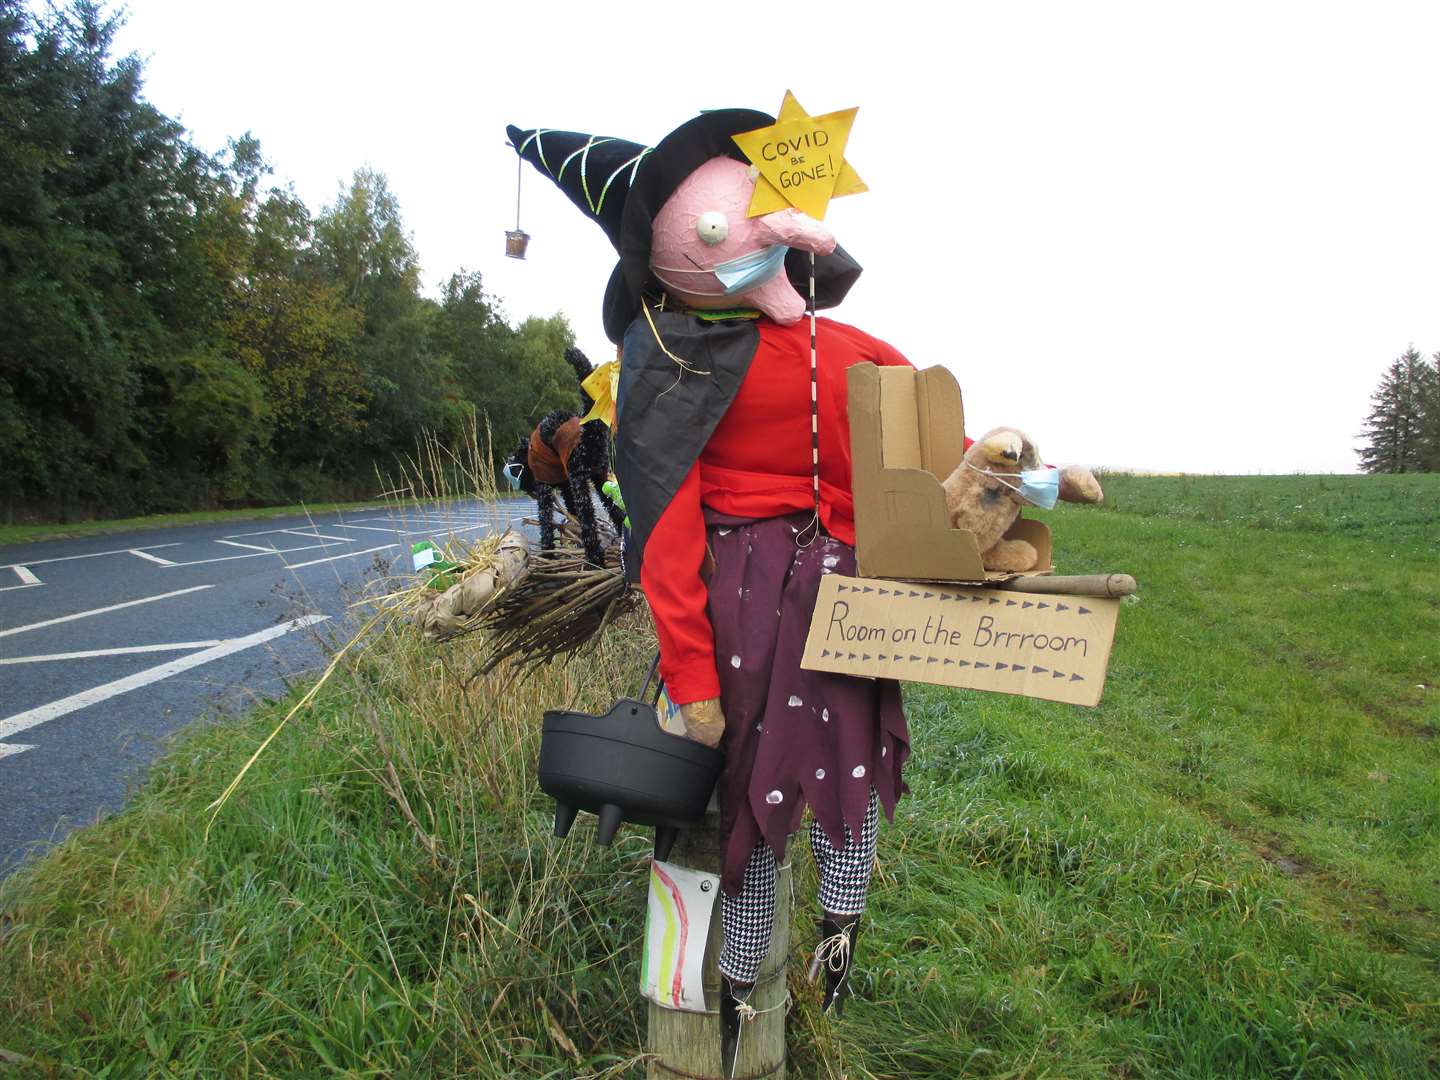 Room on the Broom was the inspiration for this scarecrow.